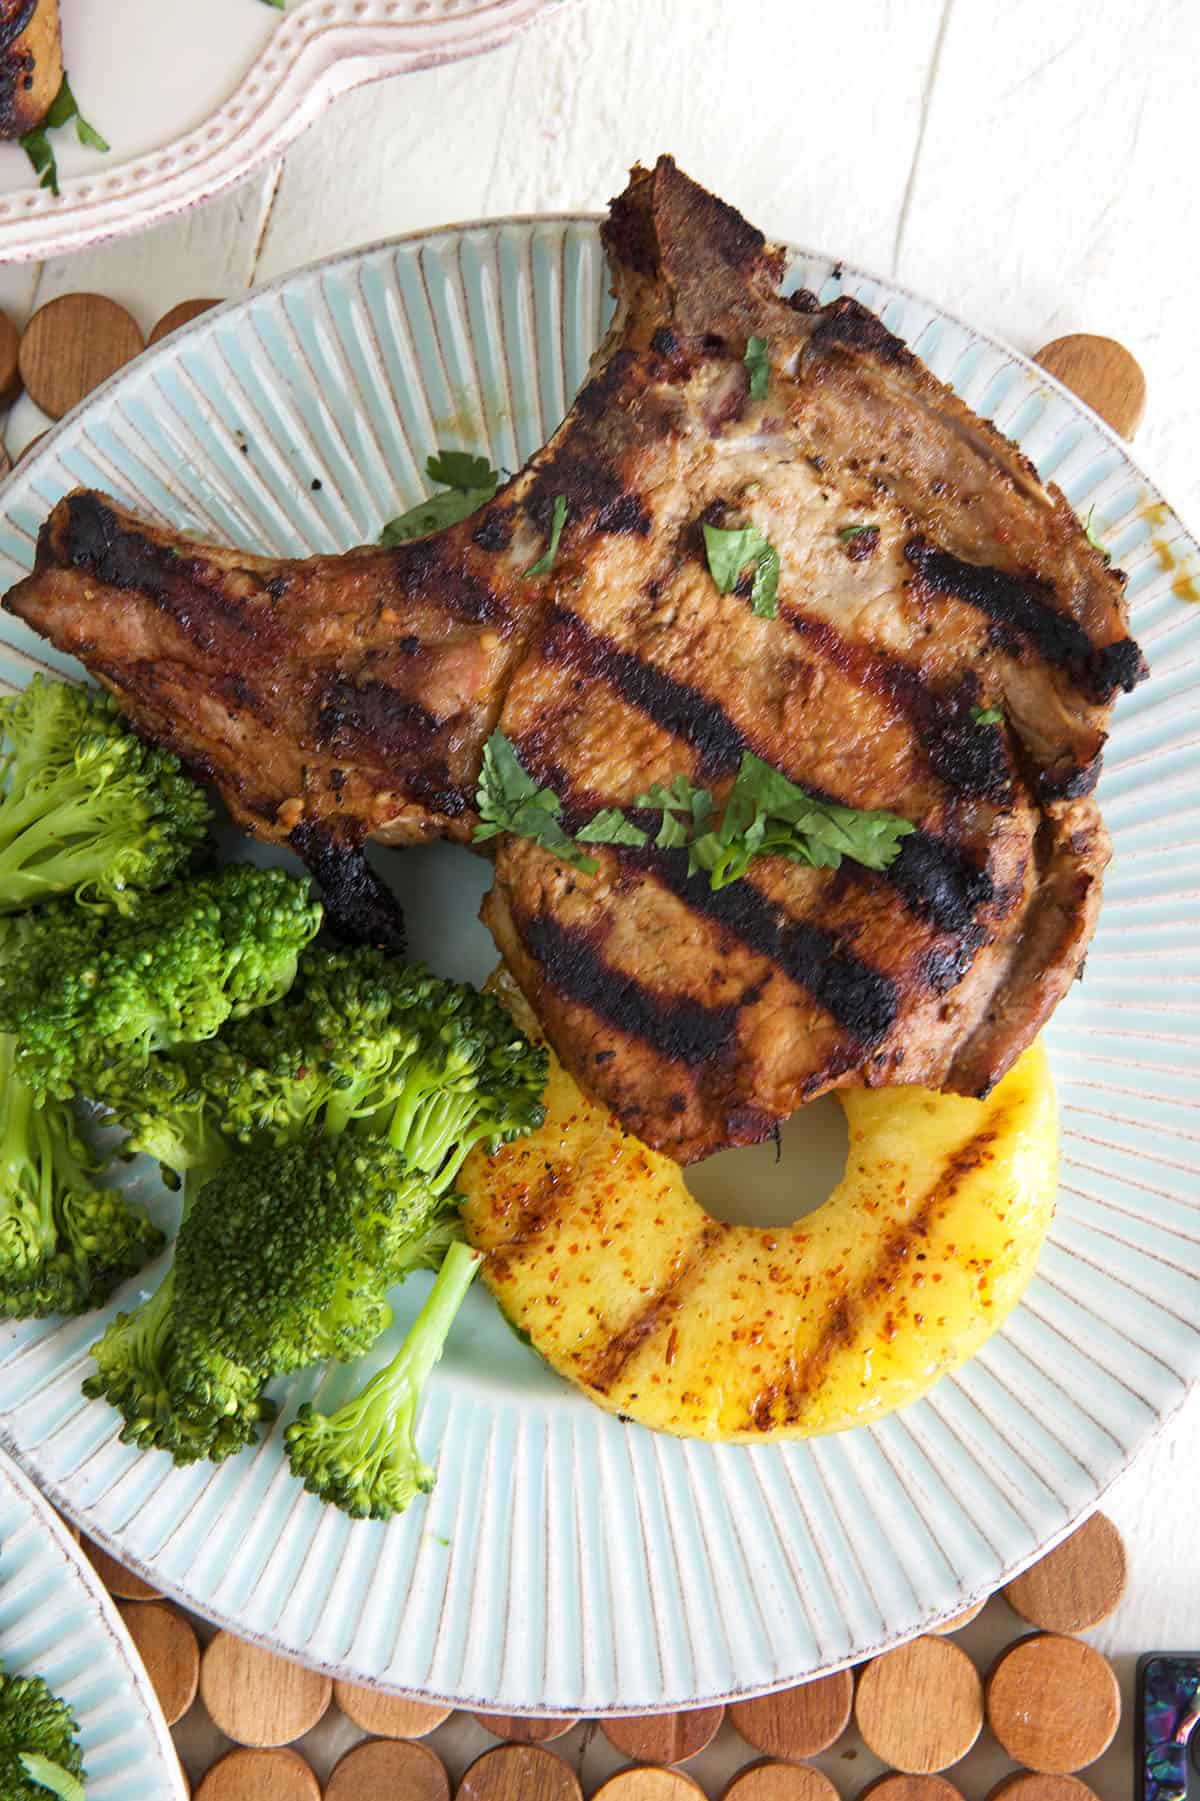 Grilled pork chop with pineapple and broccoli on a blue plate